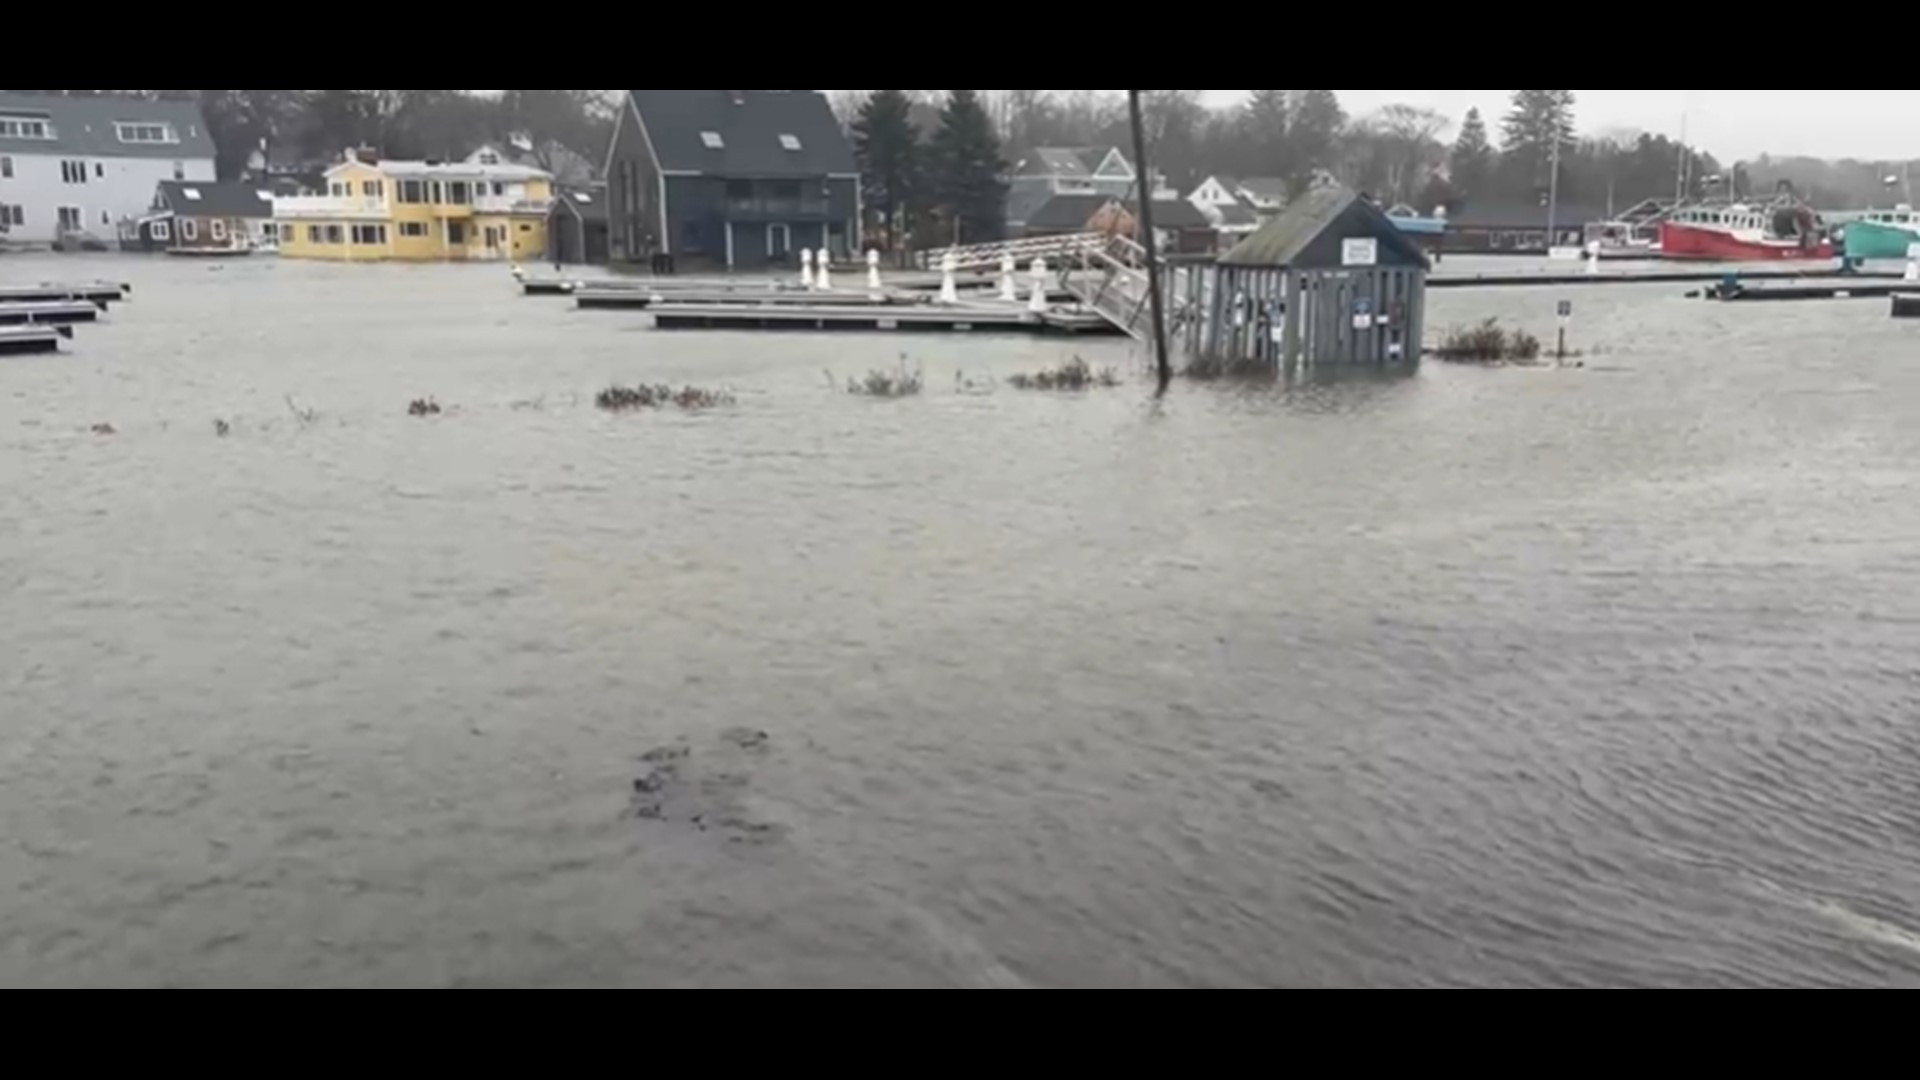 Parts of Kennebunk were under water as a result of Saturday's storm.